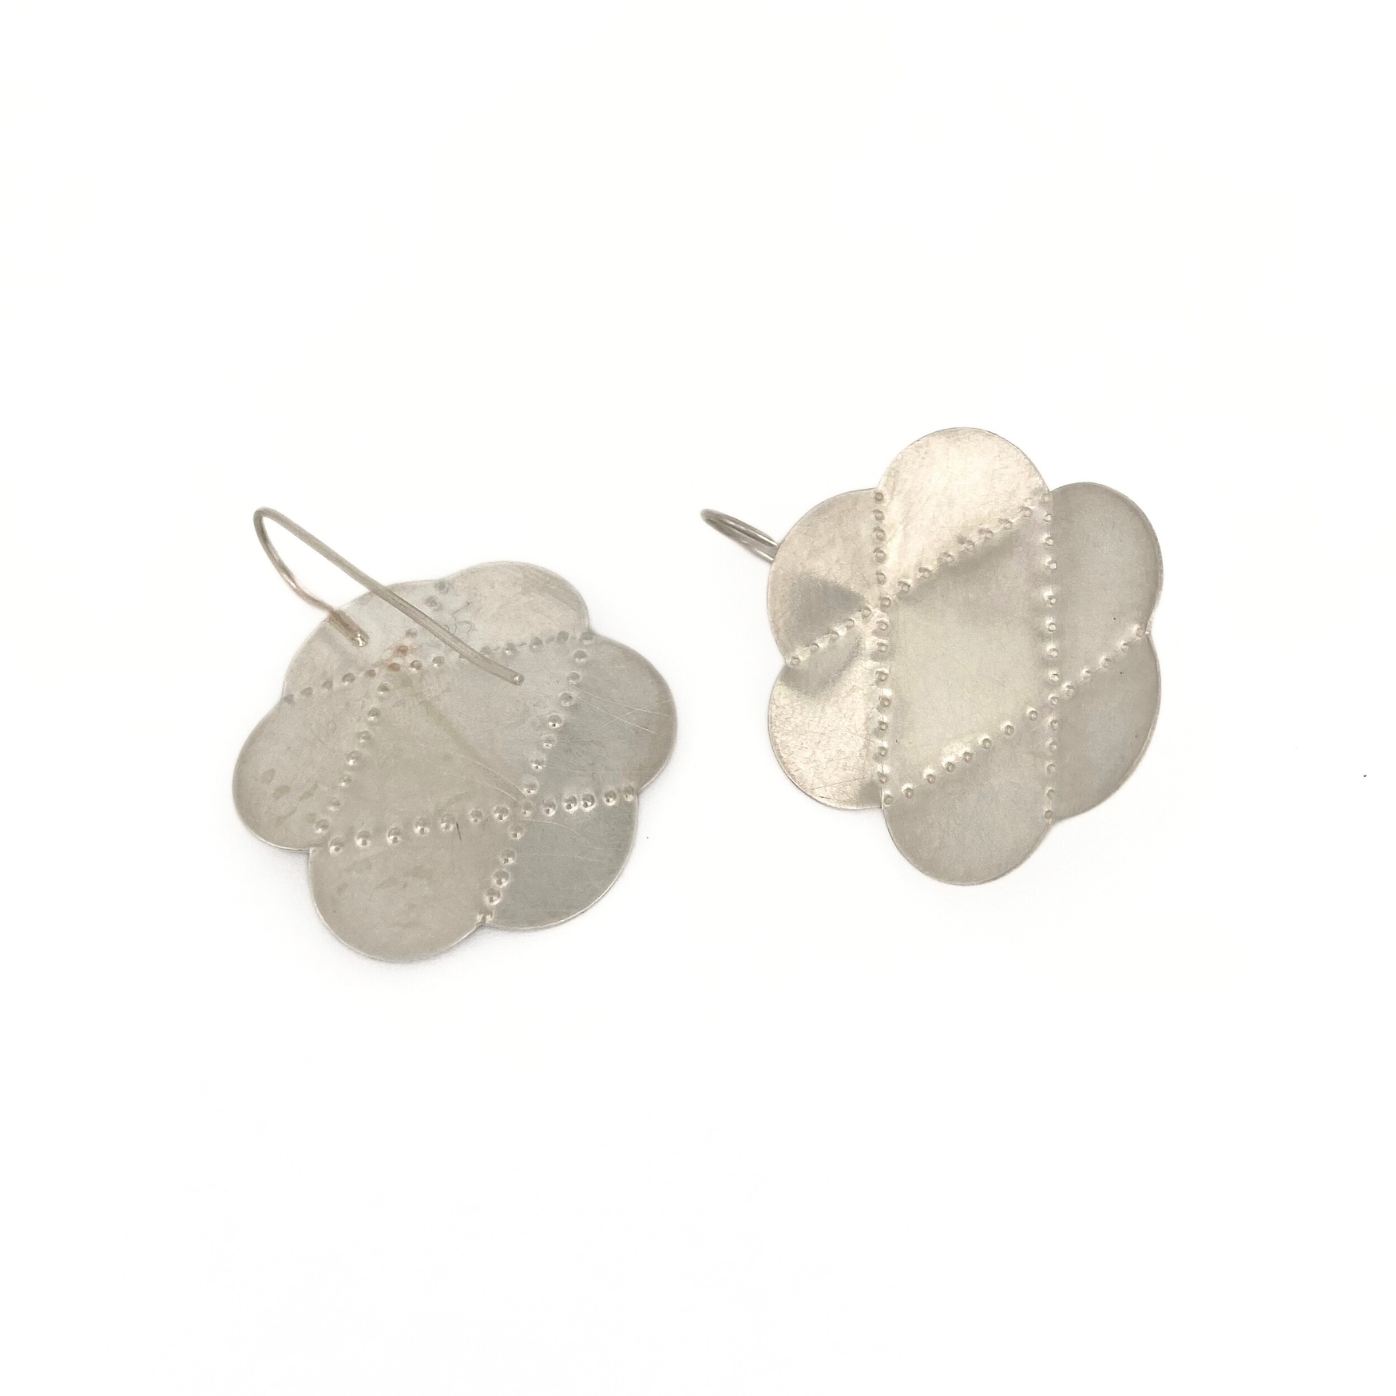 Scalloped & Faceted EARRINGS: Large Criss Cross FW